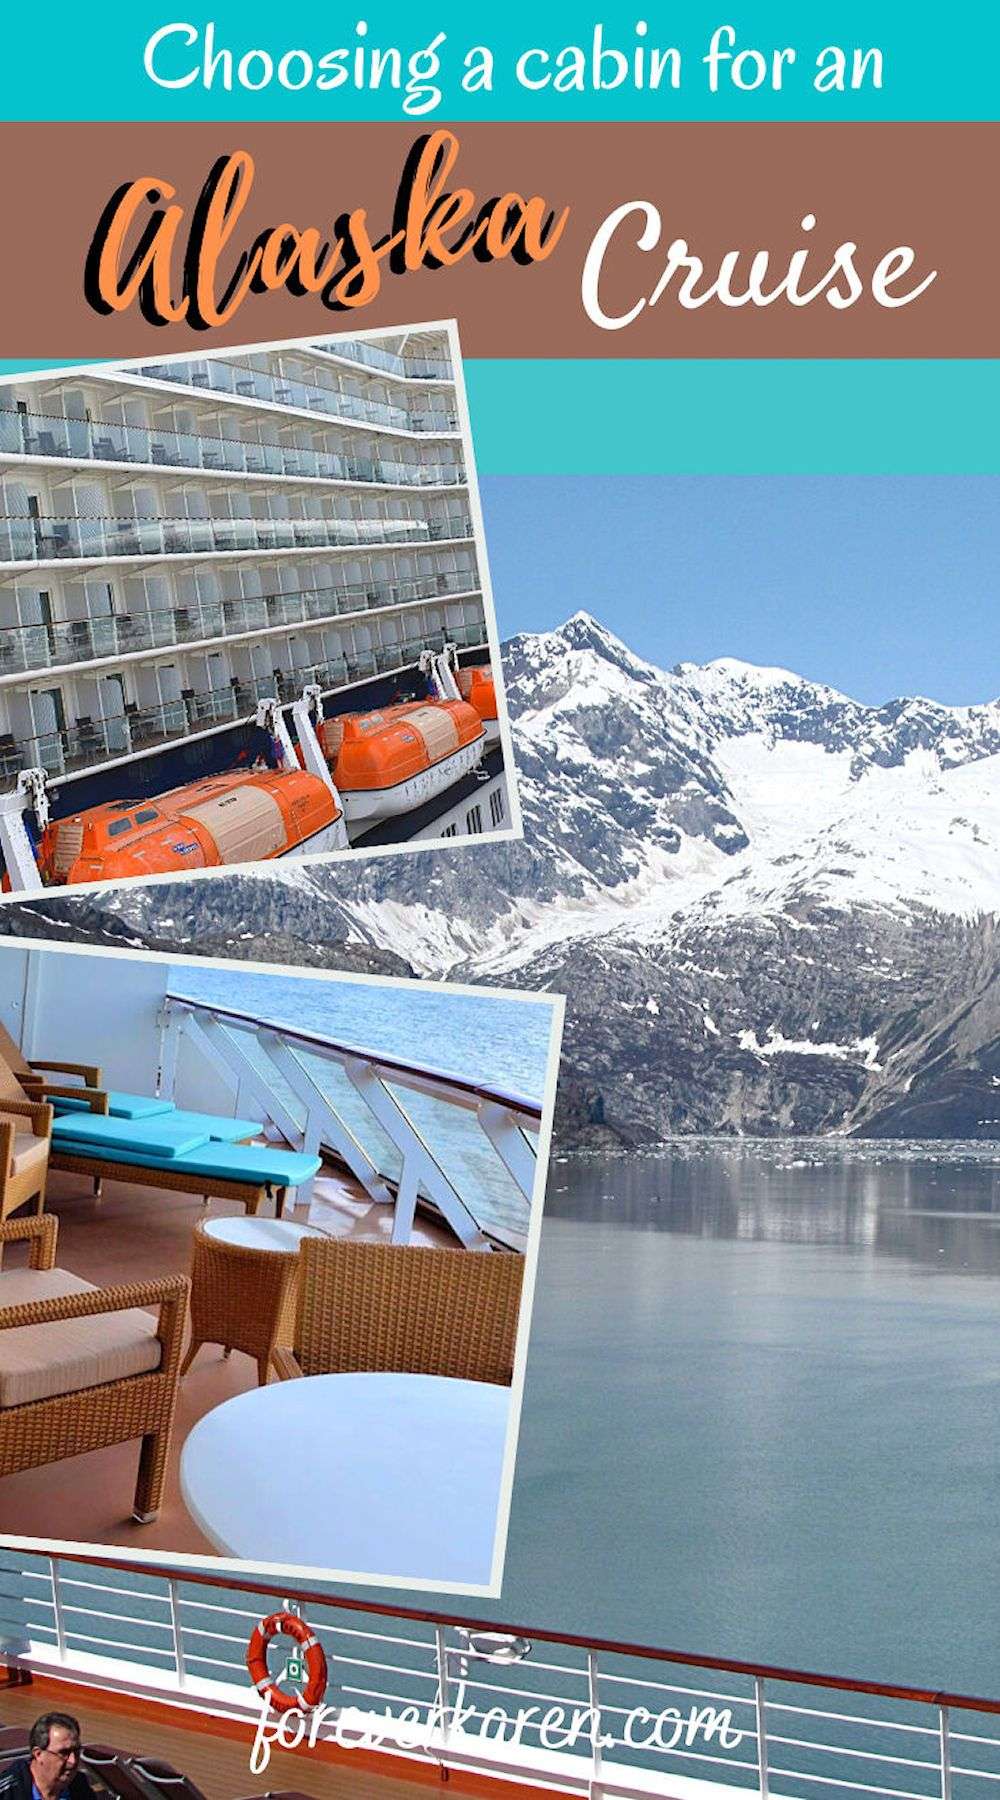 How To Choose A Cabin For An Alaska Cruise